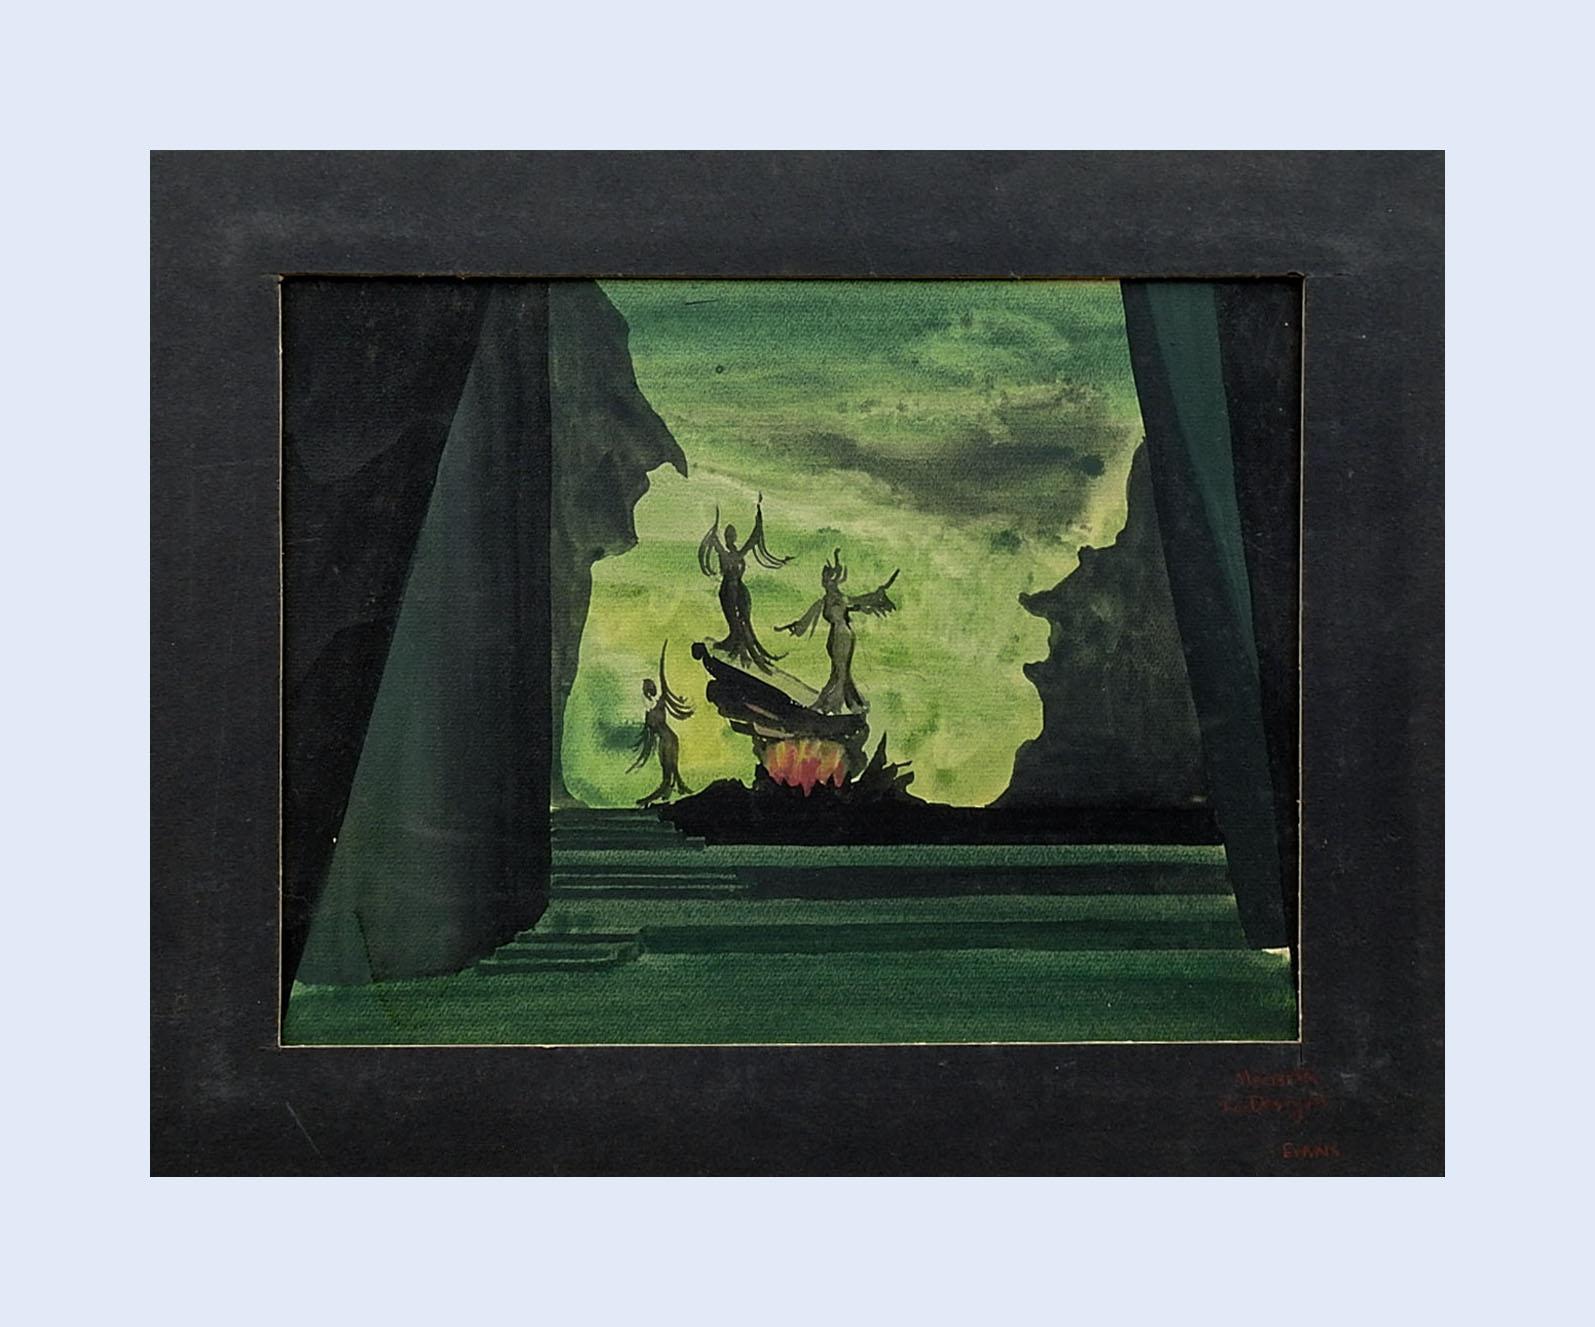 Vintage mid century gouache on artist board painting.  Set design for 3 witches in Macbeth.  Signed Evans lower right mat.  Unframed, displayed attached to black mat, scuffing to mat.